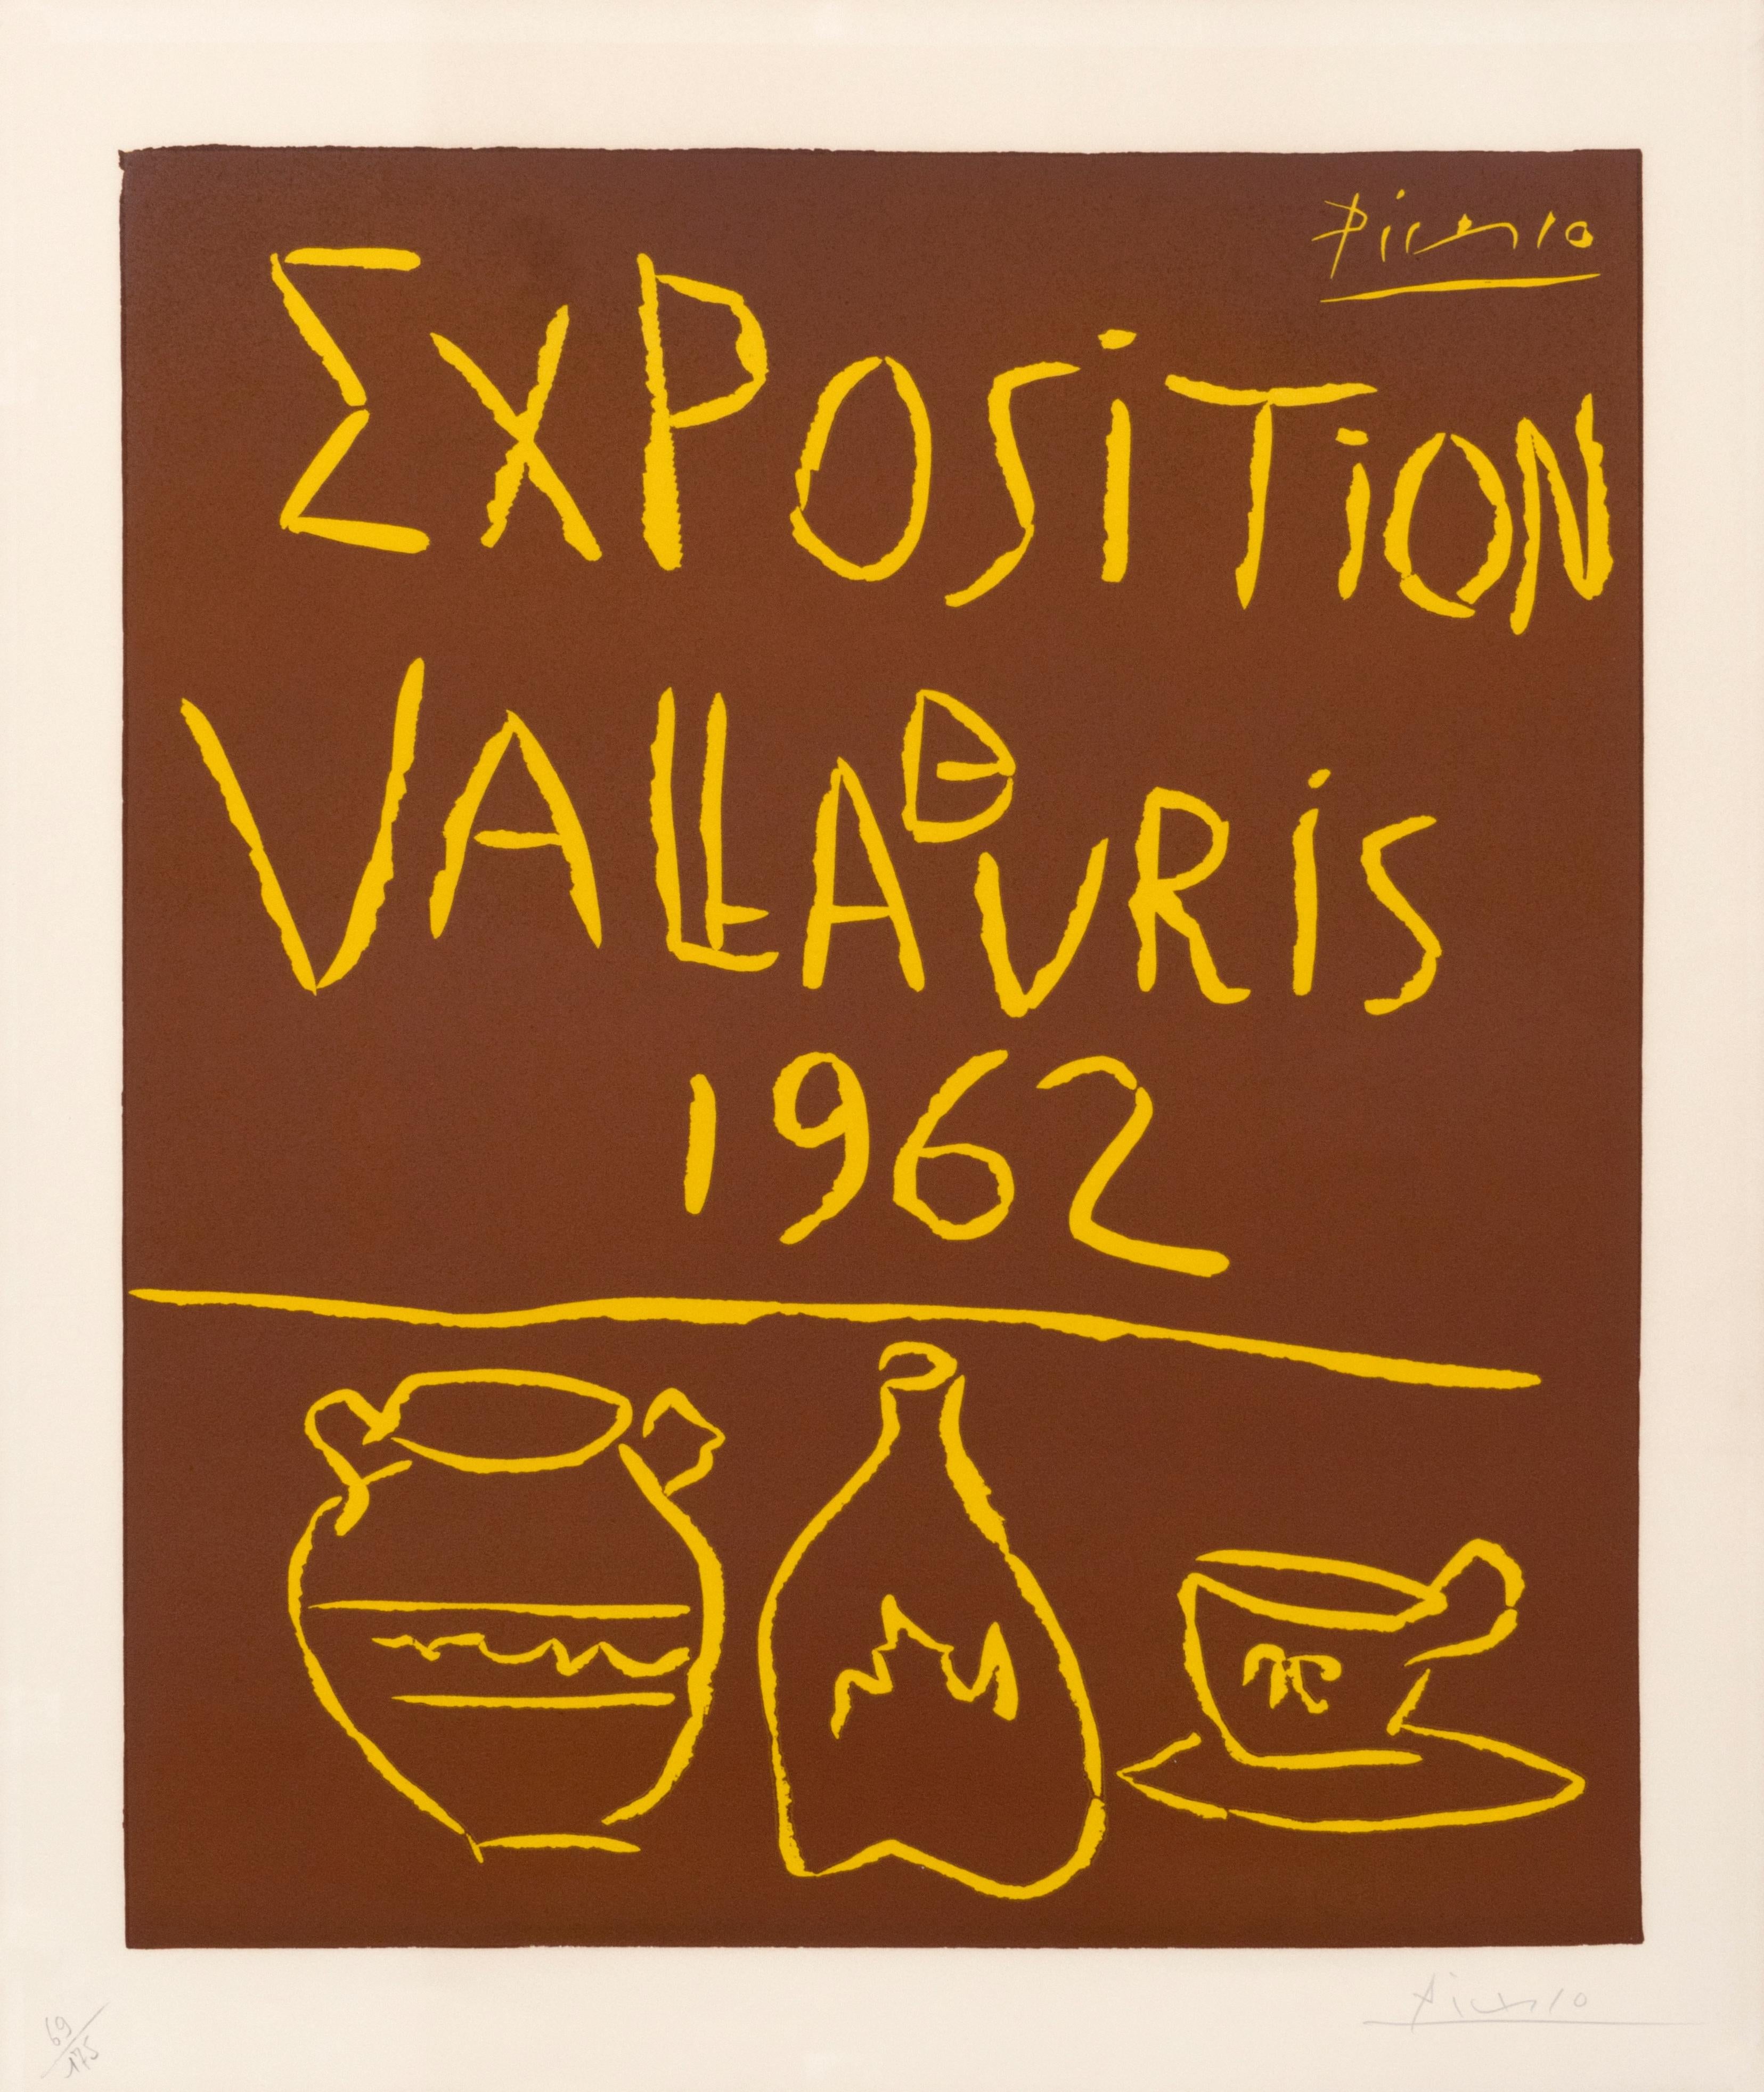 Exposition Vallauris 1962" hand signed Vintage Exhibition Poster - Print by Pablo Picasso